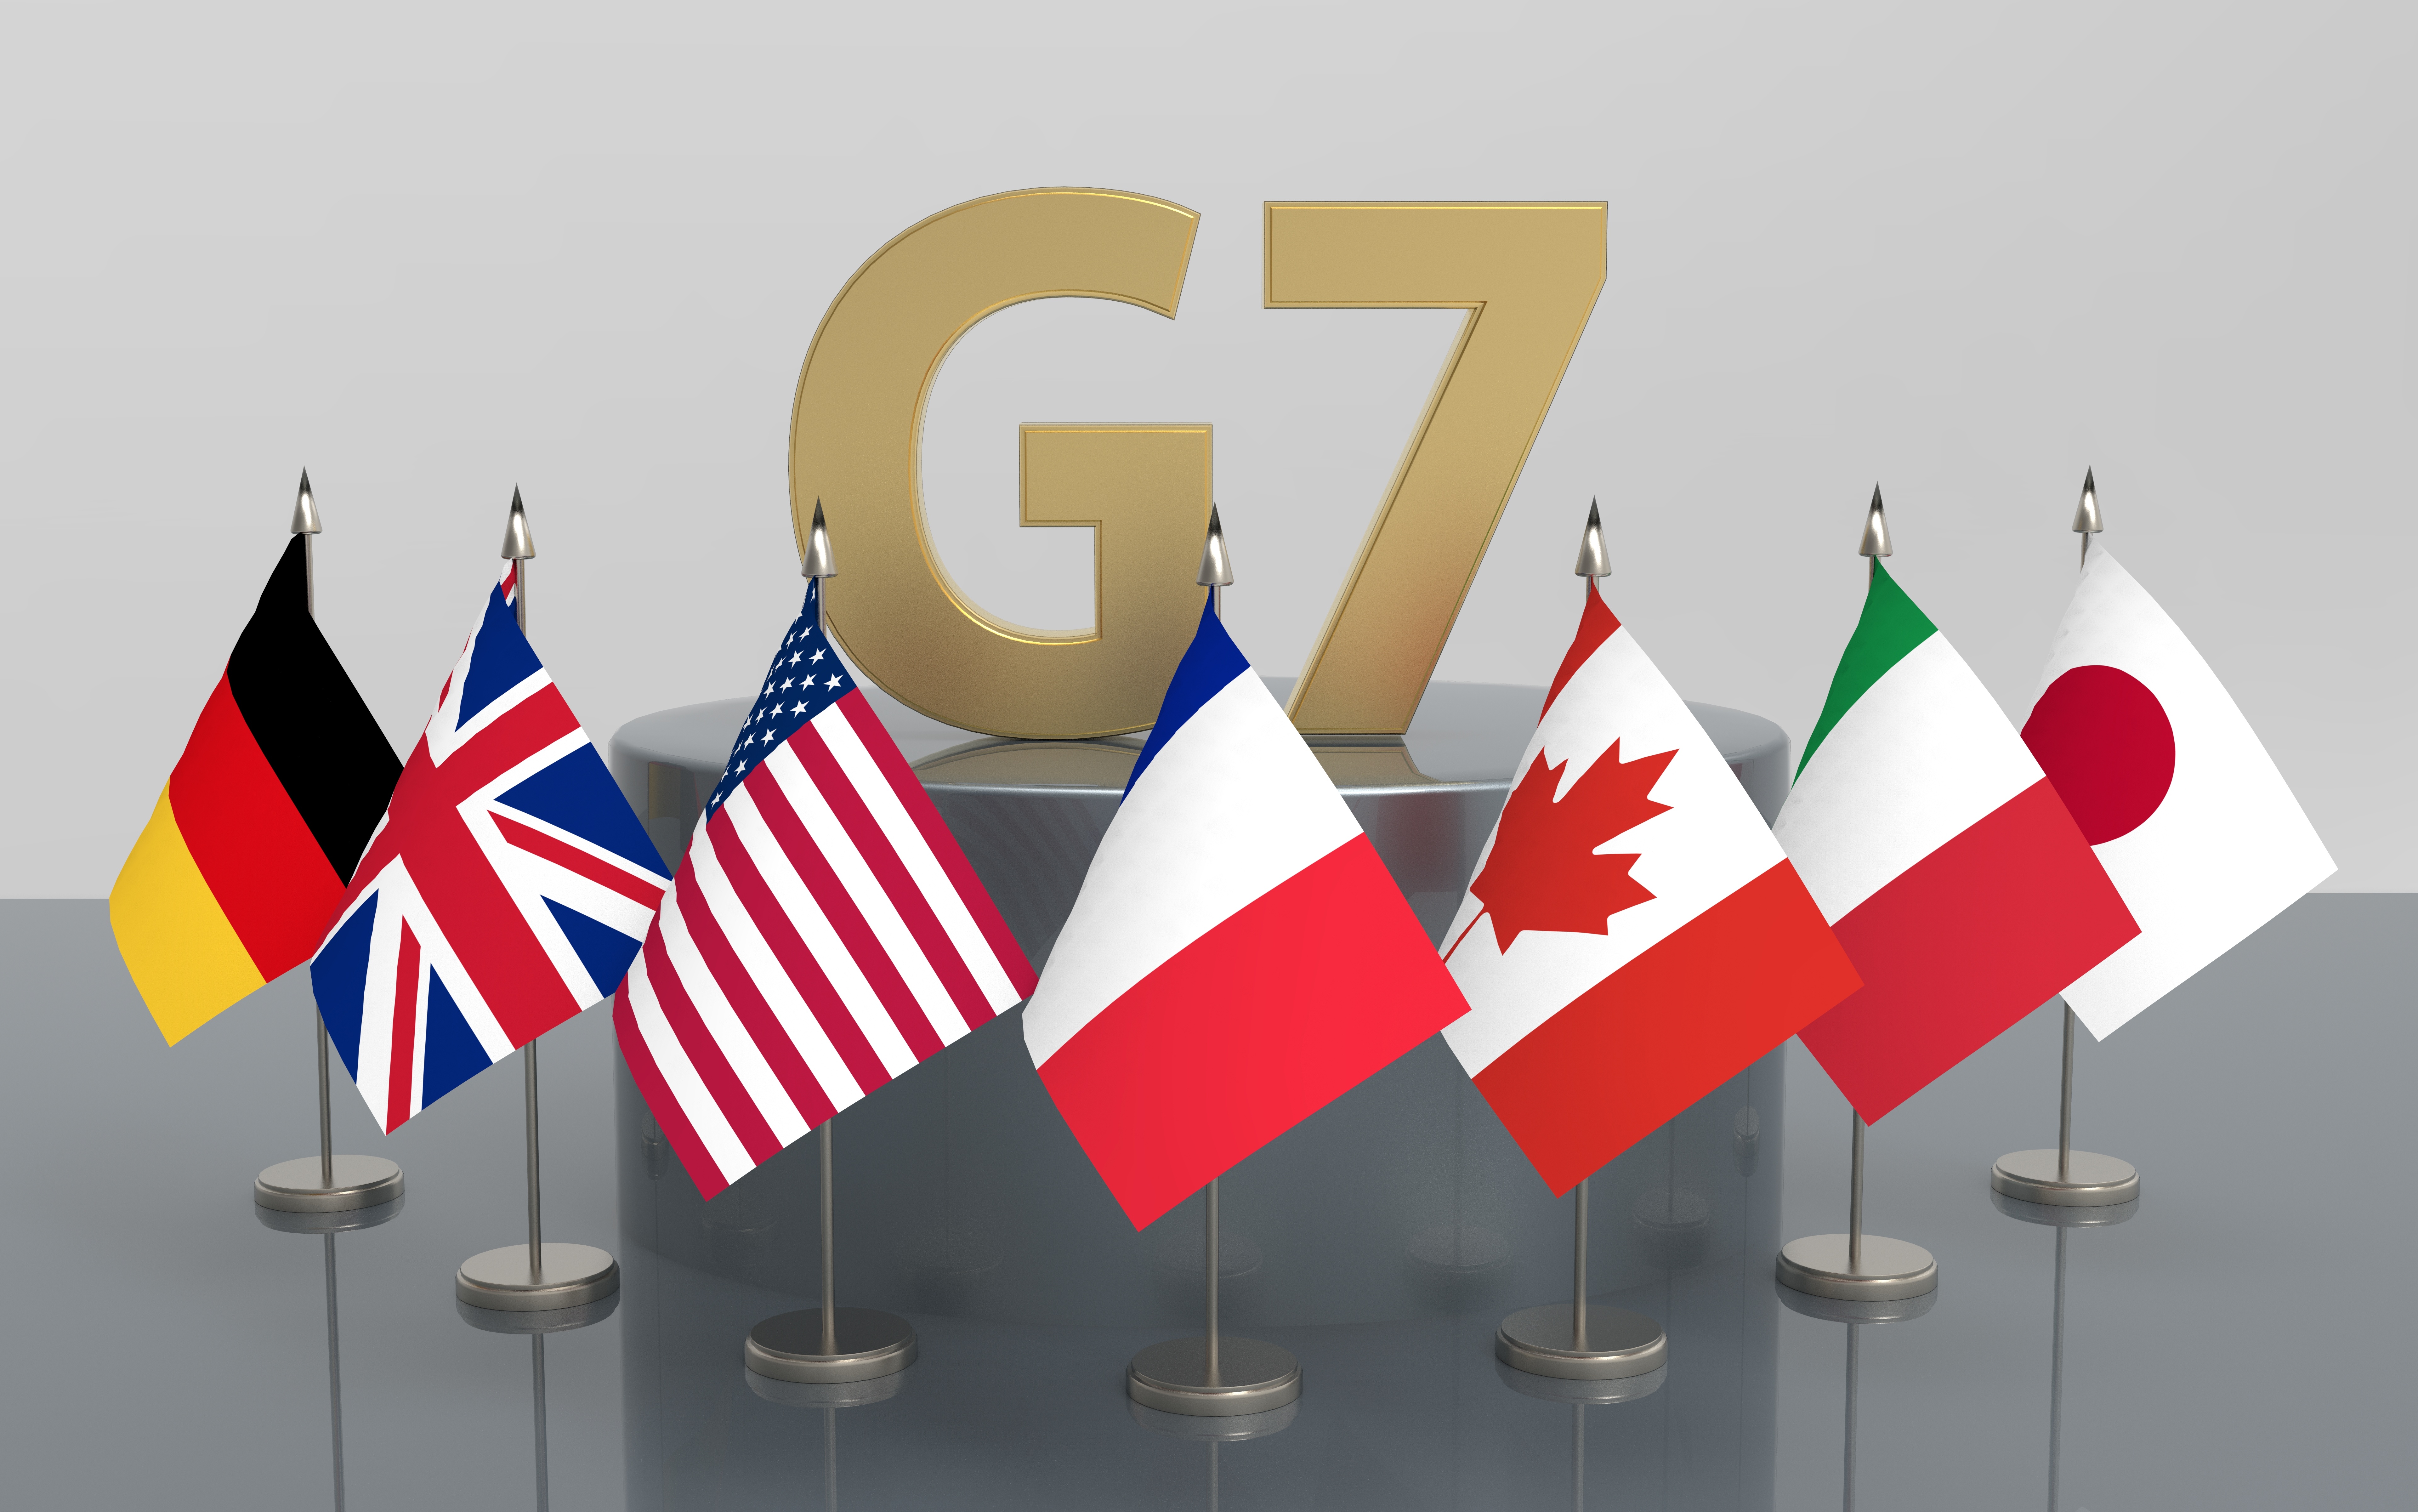 Max Keiser Predicts That G7 Country Will Start Mining Bitcoin